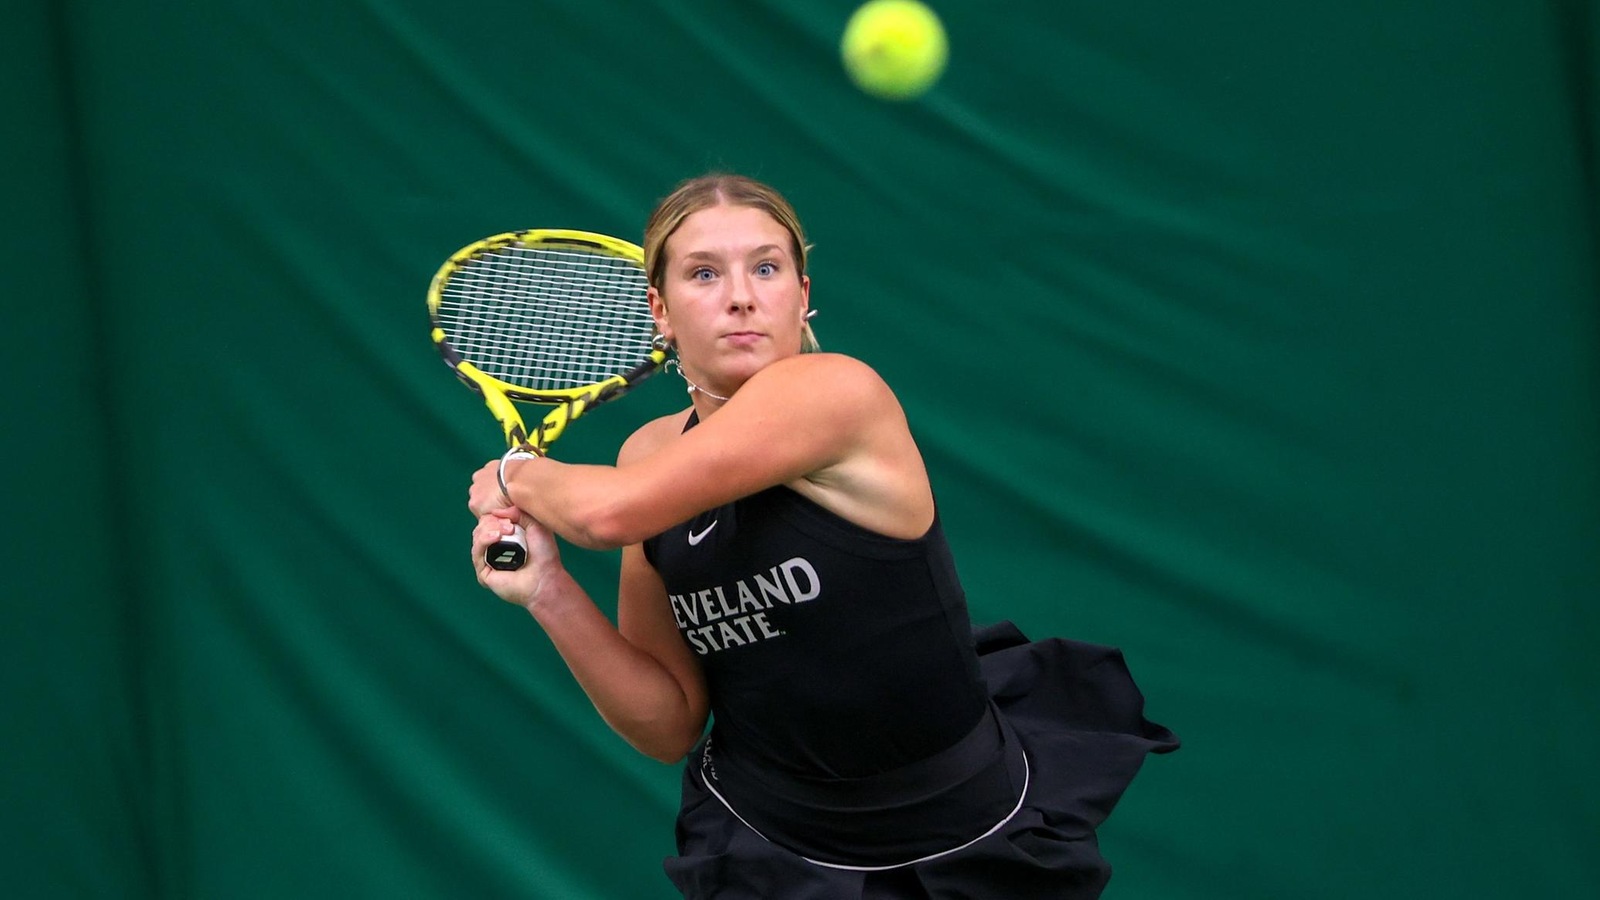 Cleveland State Women’s Tennis Sweeps #HLTennis Weekly Awards